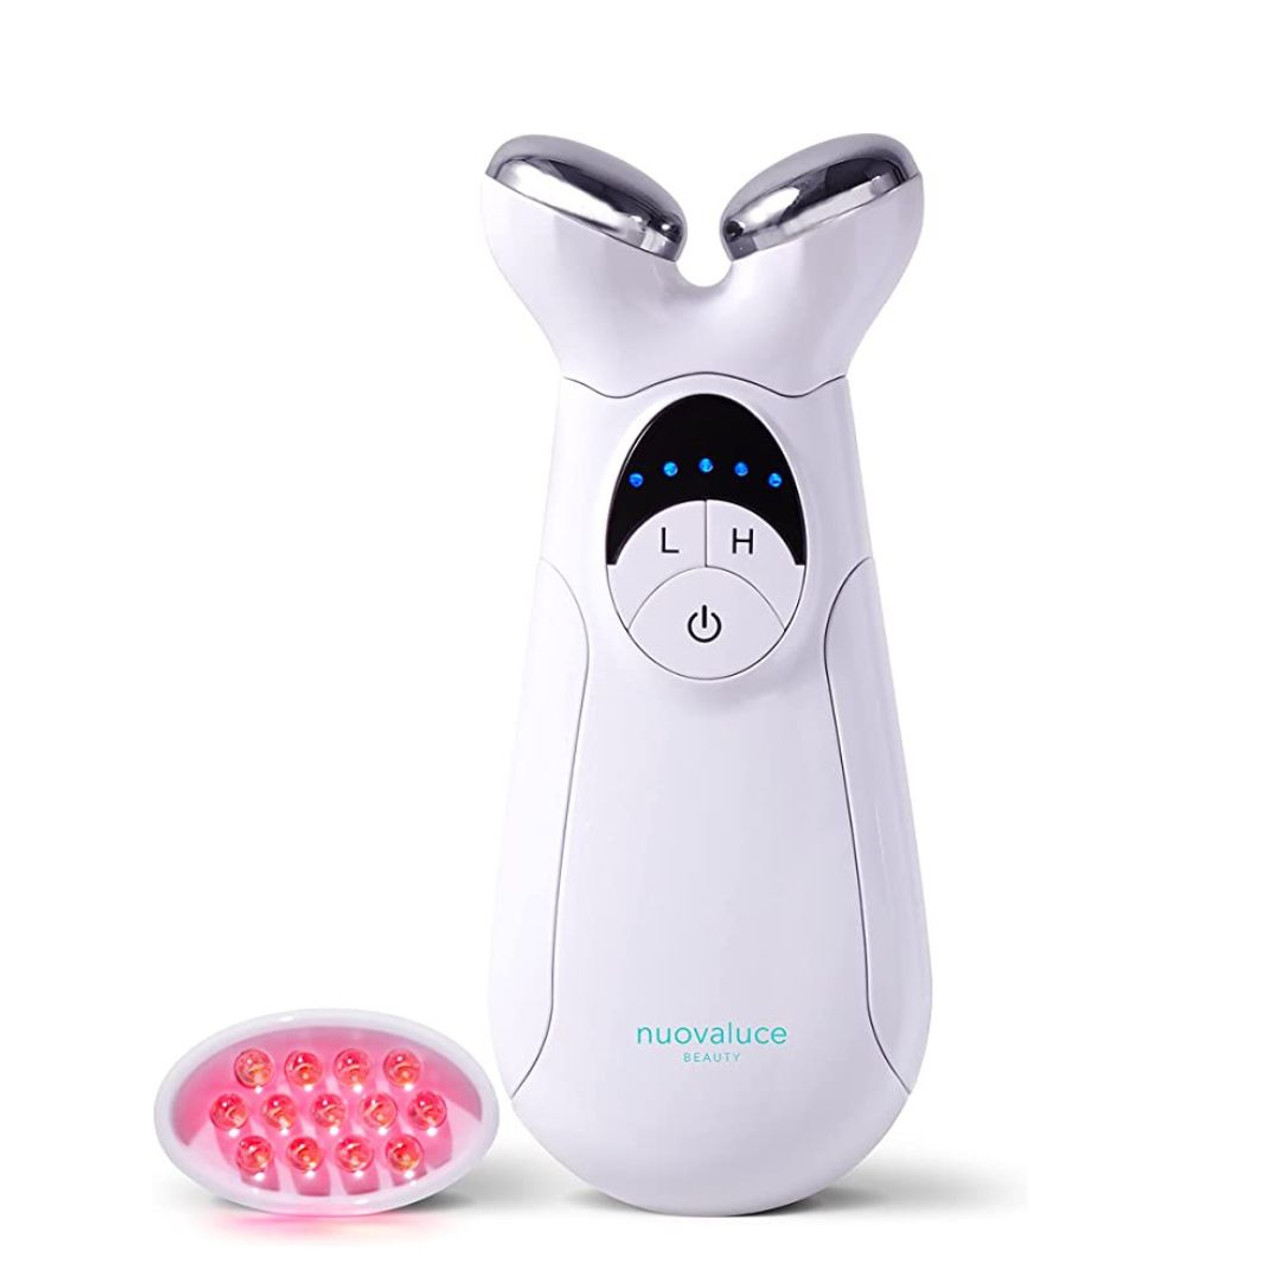 NUOVALUCE BEAUTY Beauty 2 in-1 Anti-Aging LED Light Therapy & Microcurrent Facial Device - Wrinkle Eraser & Skin Smoothing Tool